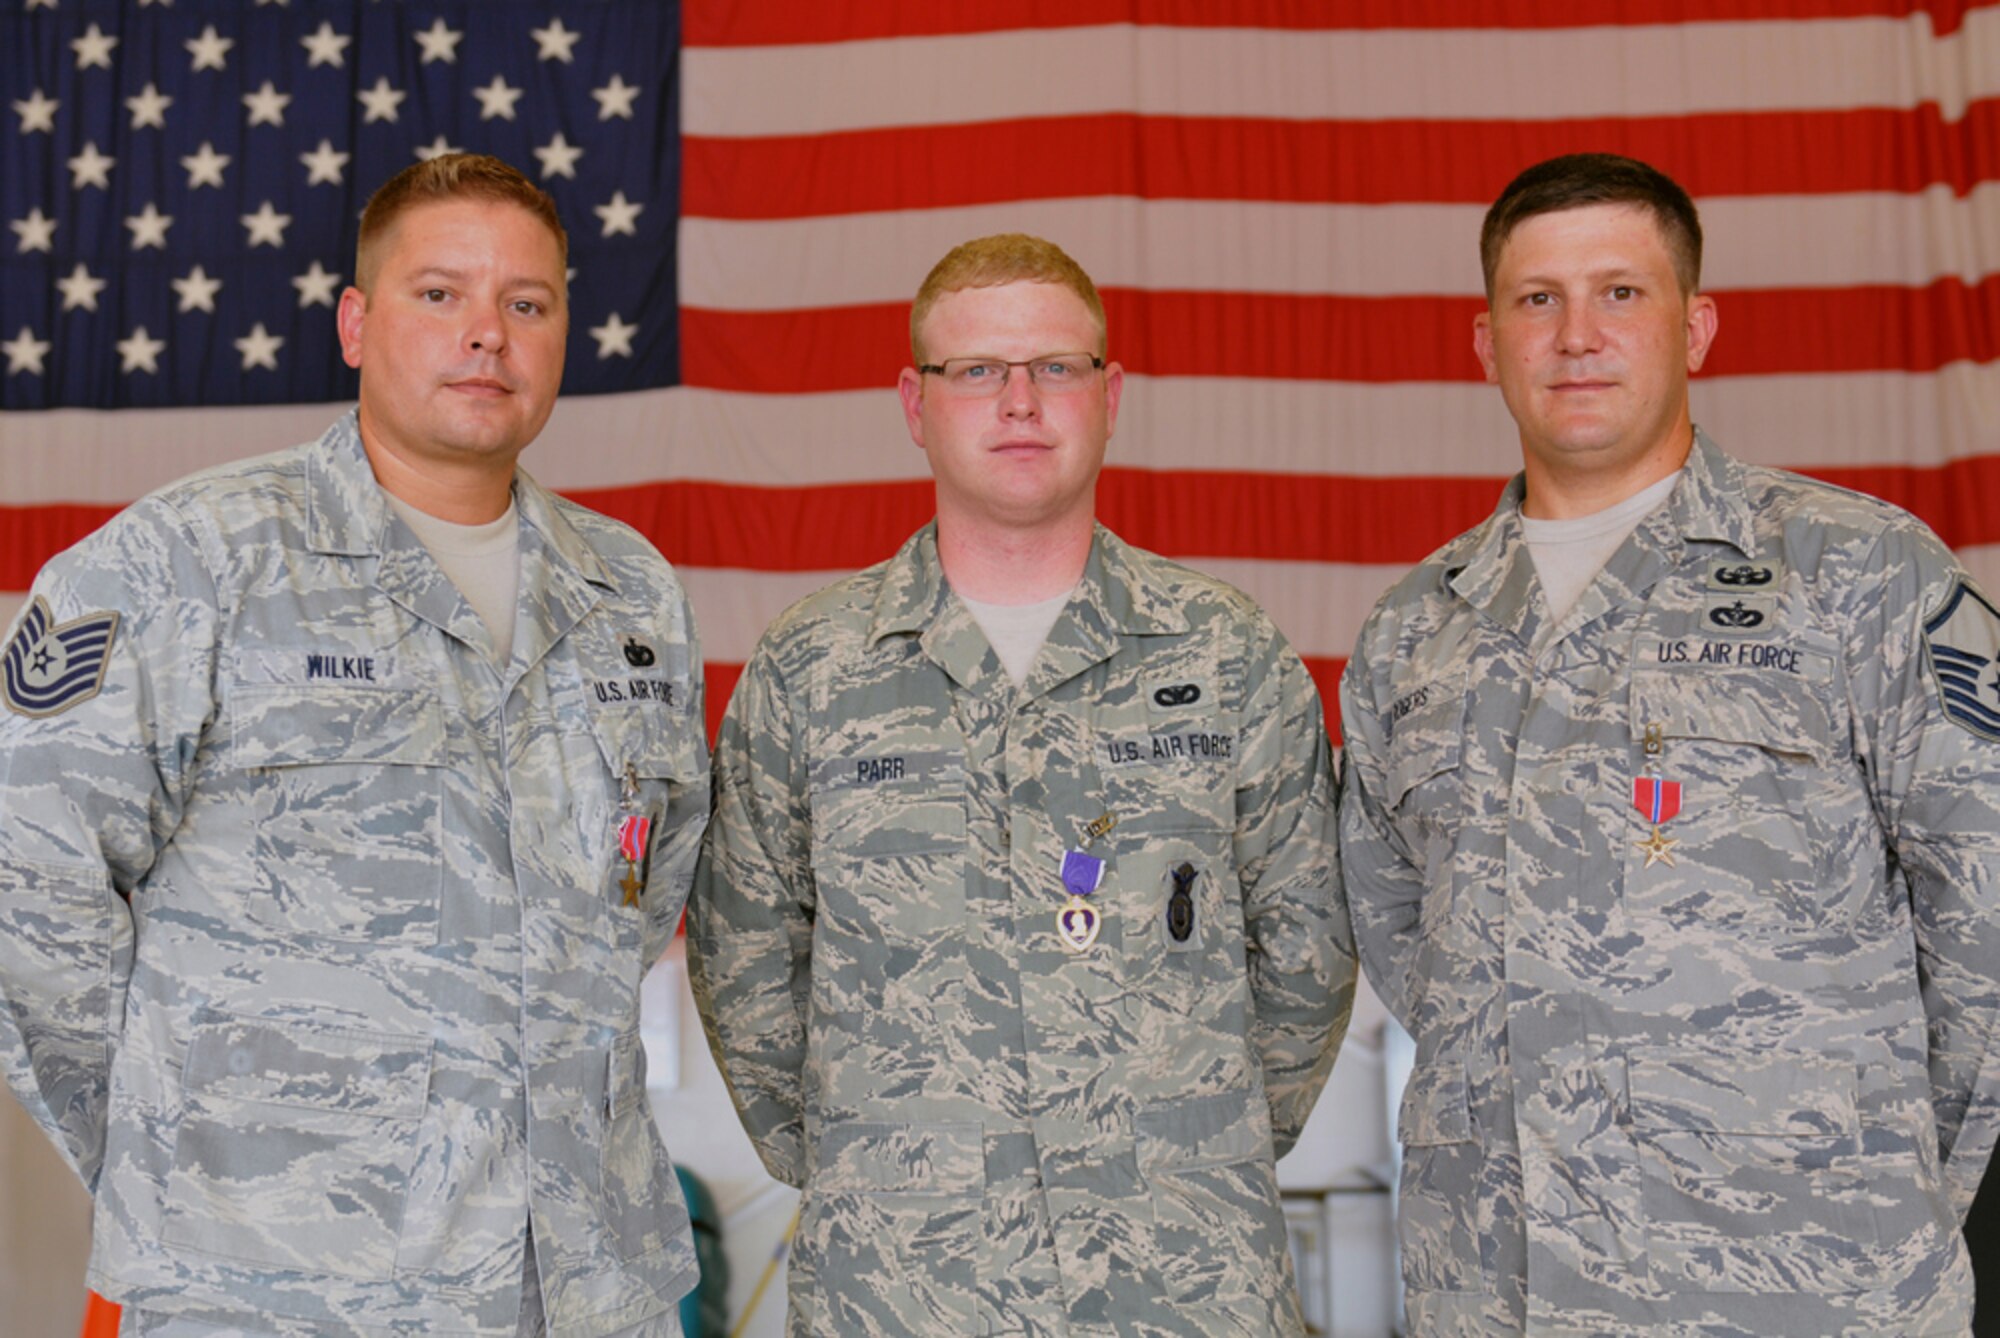 (left to right) Bronze Star recipient Technical Sgt. Charles Wilkie Jr., Purple Heart recipient Senior Airman Sean Parr, and Bronze Star recipient Master Sgt. Raleigh Rogers, stand for a photo following an awards ceremony in their honor, August 19, 2012, 125th Fighter Wing, Florida Air National Guard, Jacksonville, Fla. (Air National Guard photo by Master Sgt. Shelley Gill)